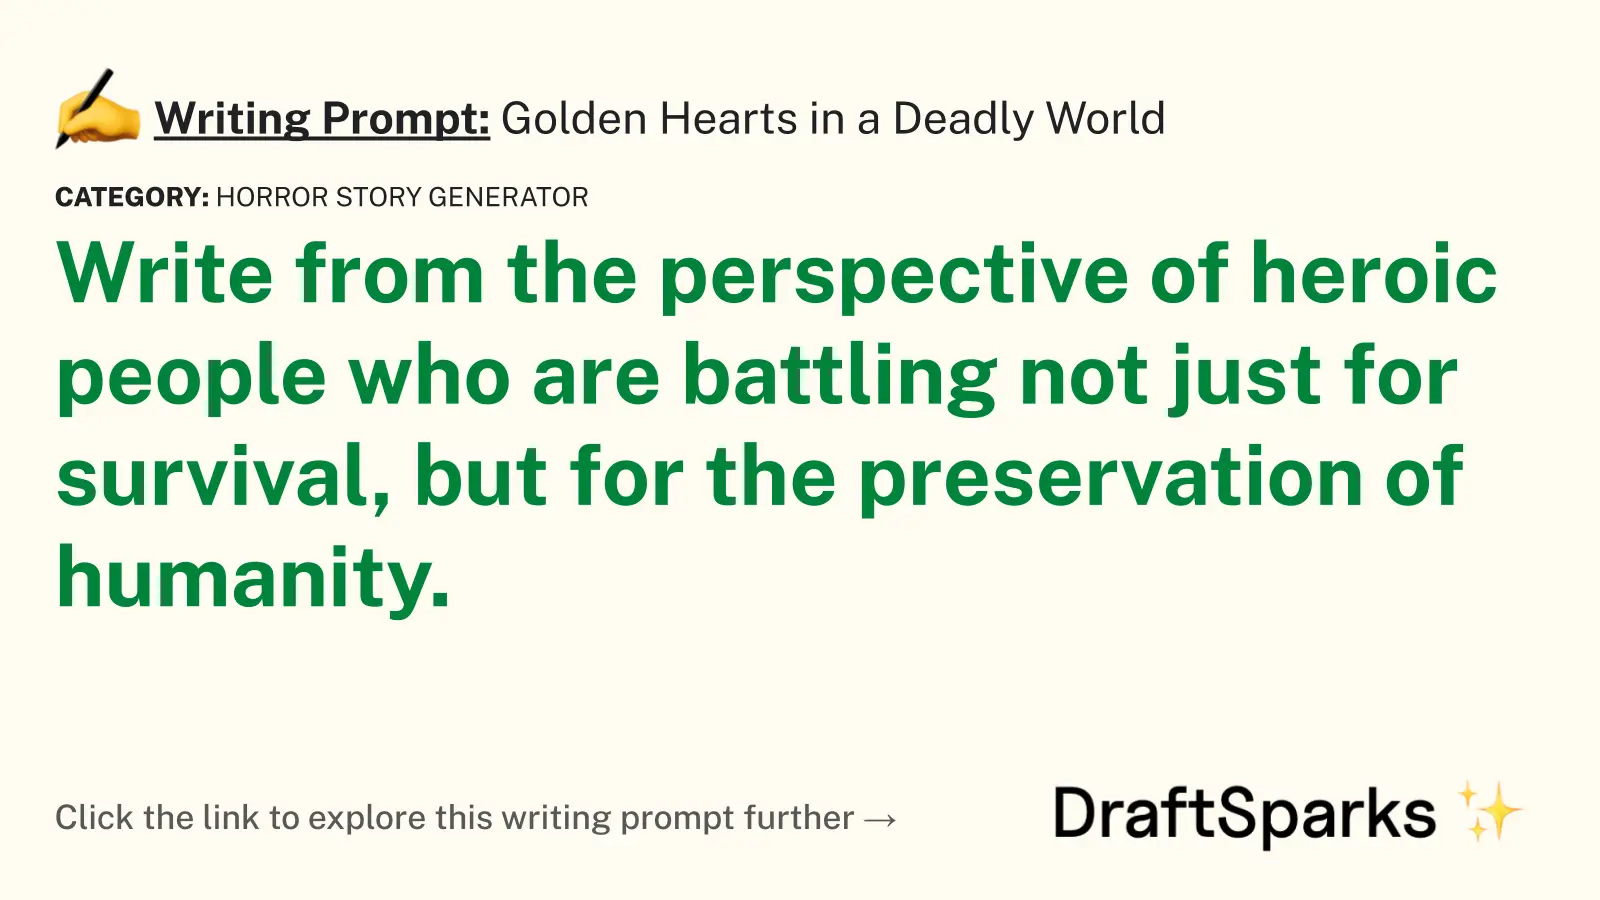 Golden Hearts in a Deadly World